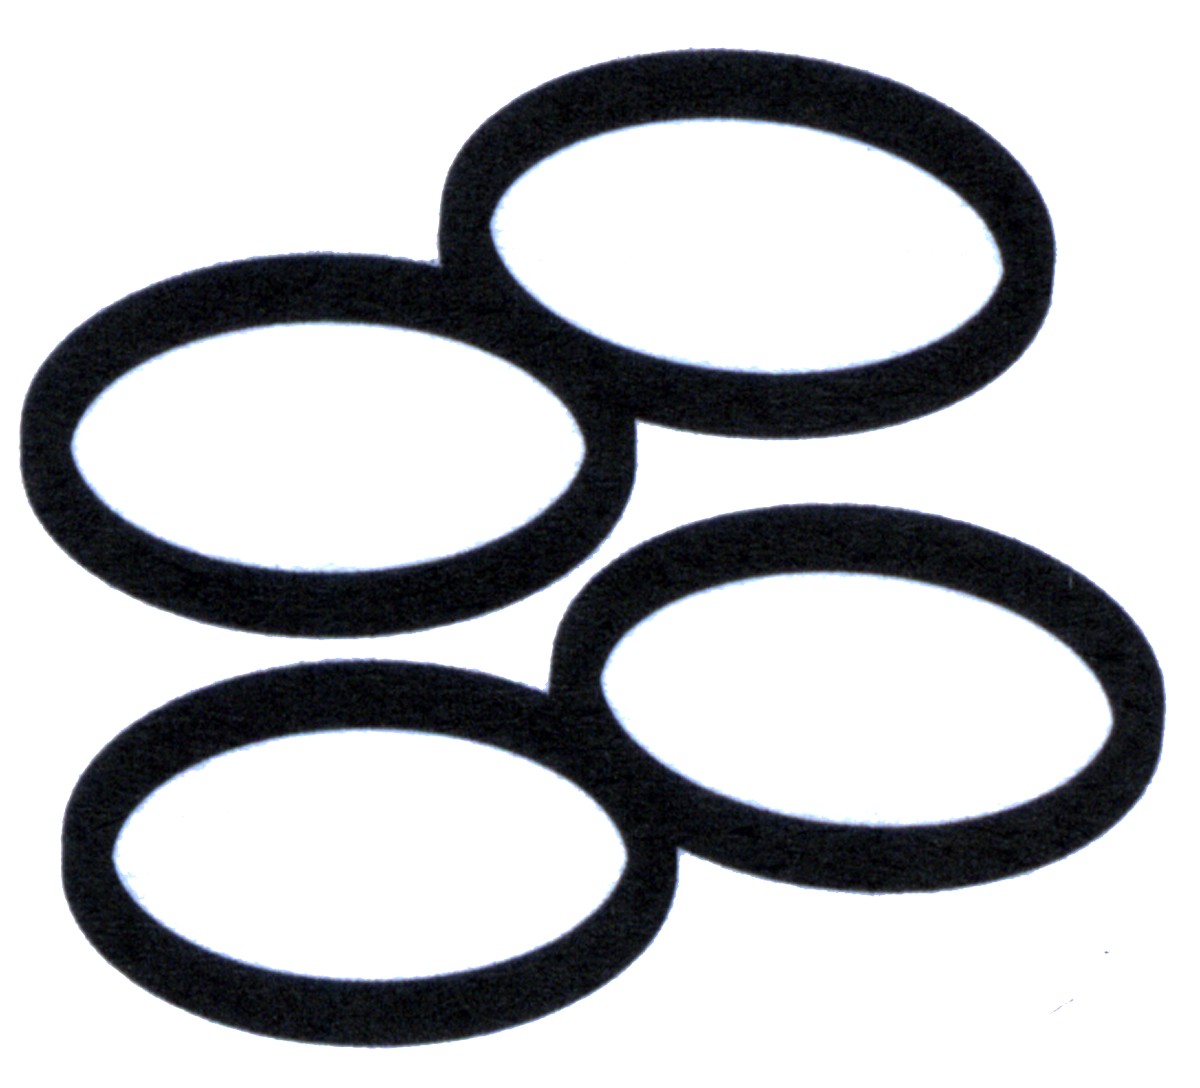 Pp21002 Large O Ring Assortment